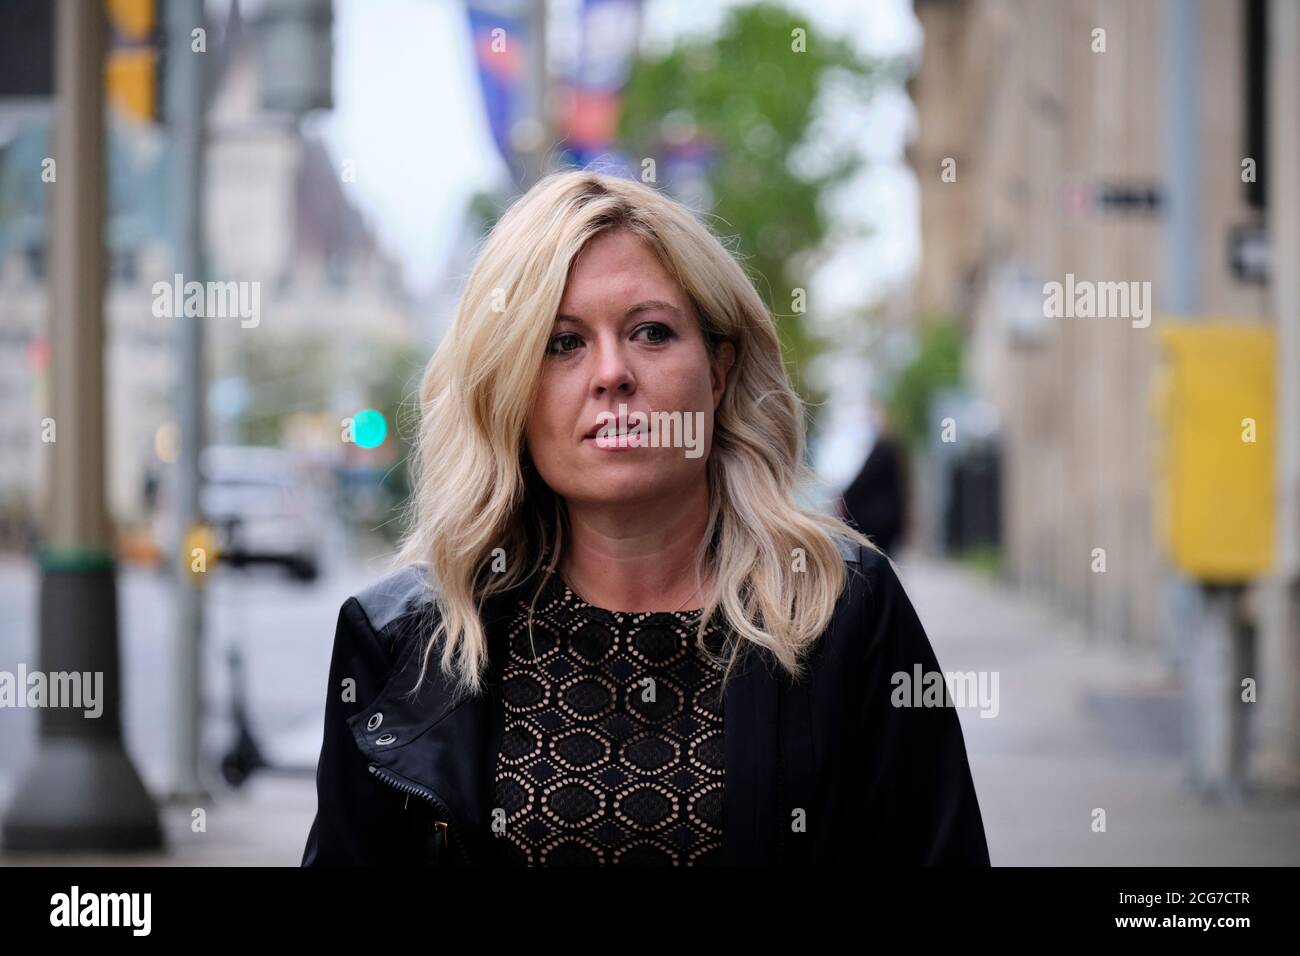 Ottawa, Canada. September 9th, 2020. Newly appointed Health Shadow Minister the Honorable Michelle Rempel Garner, Canadian Conservative Party MP for Calgary Nose Hill meets with media while arriving at first National Caucus under new leader to discuss the party's strategy when the currently prorogued parliament resumes in 2 weeks. Stock Photo